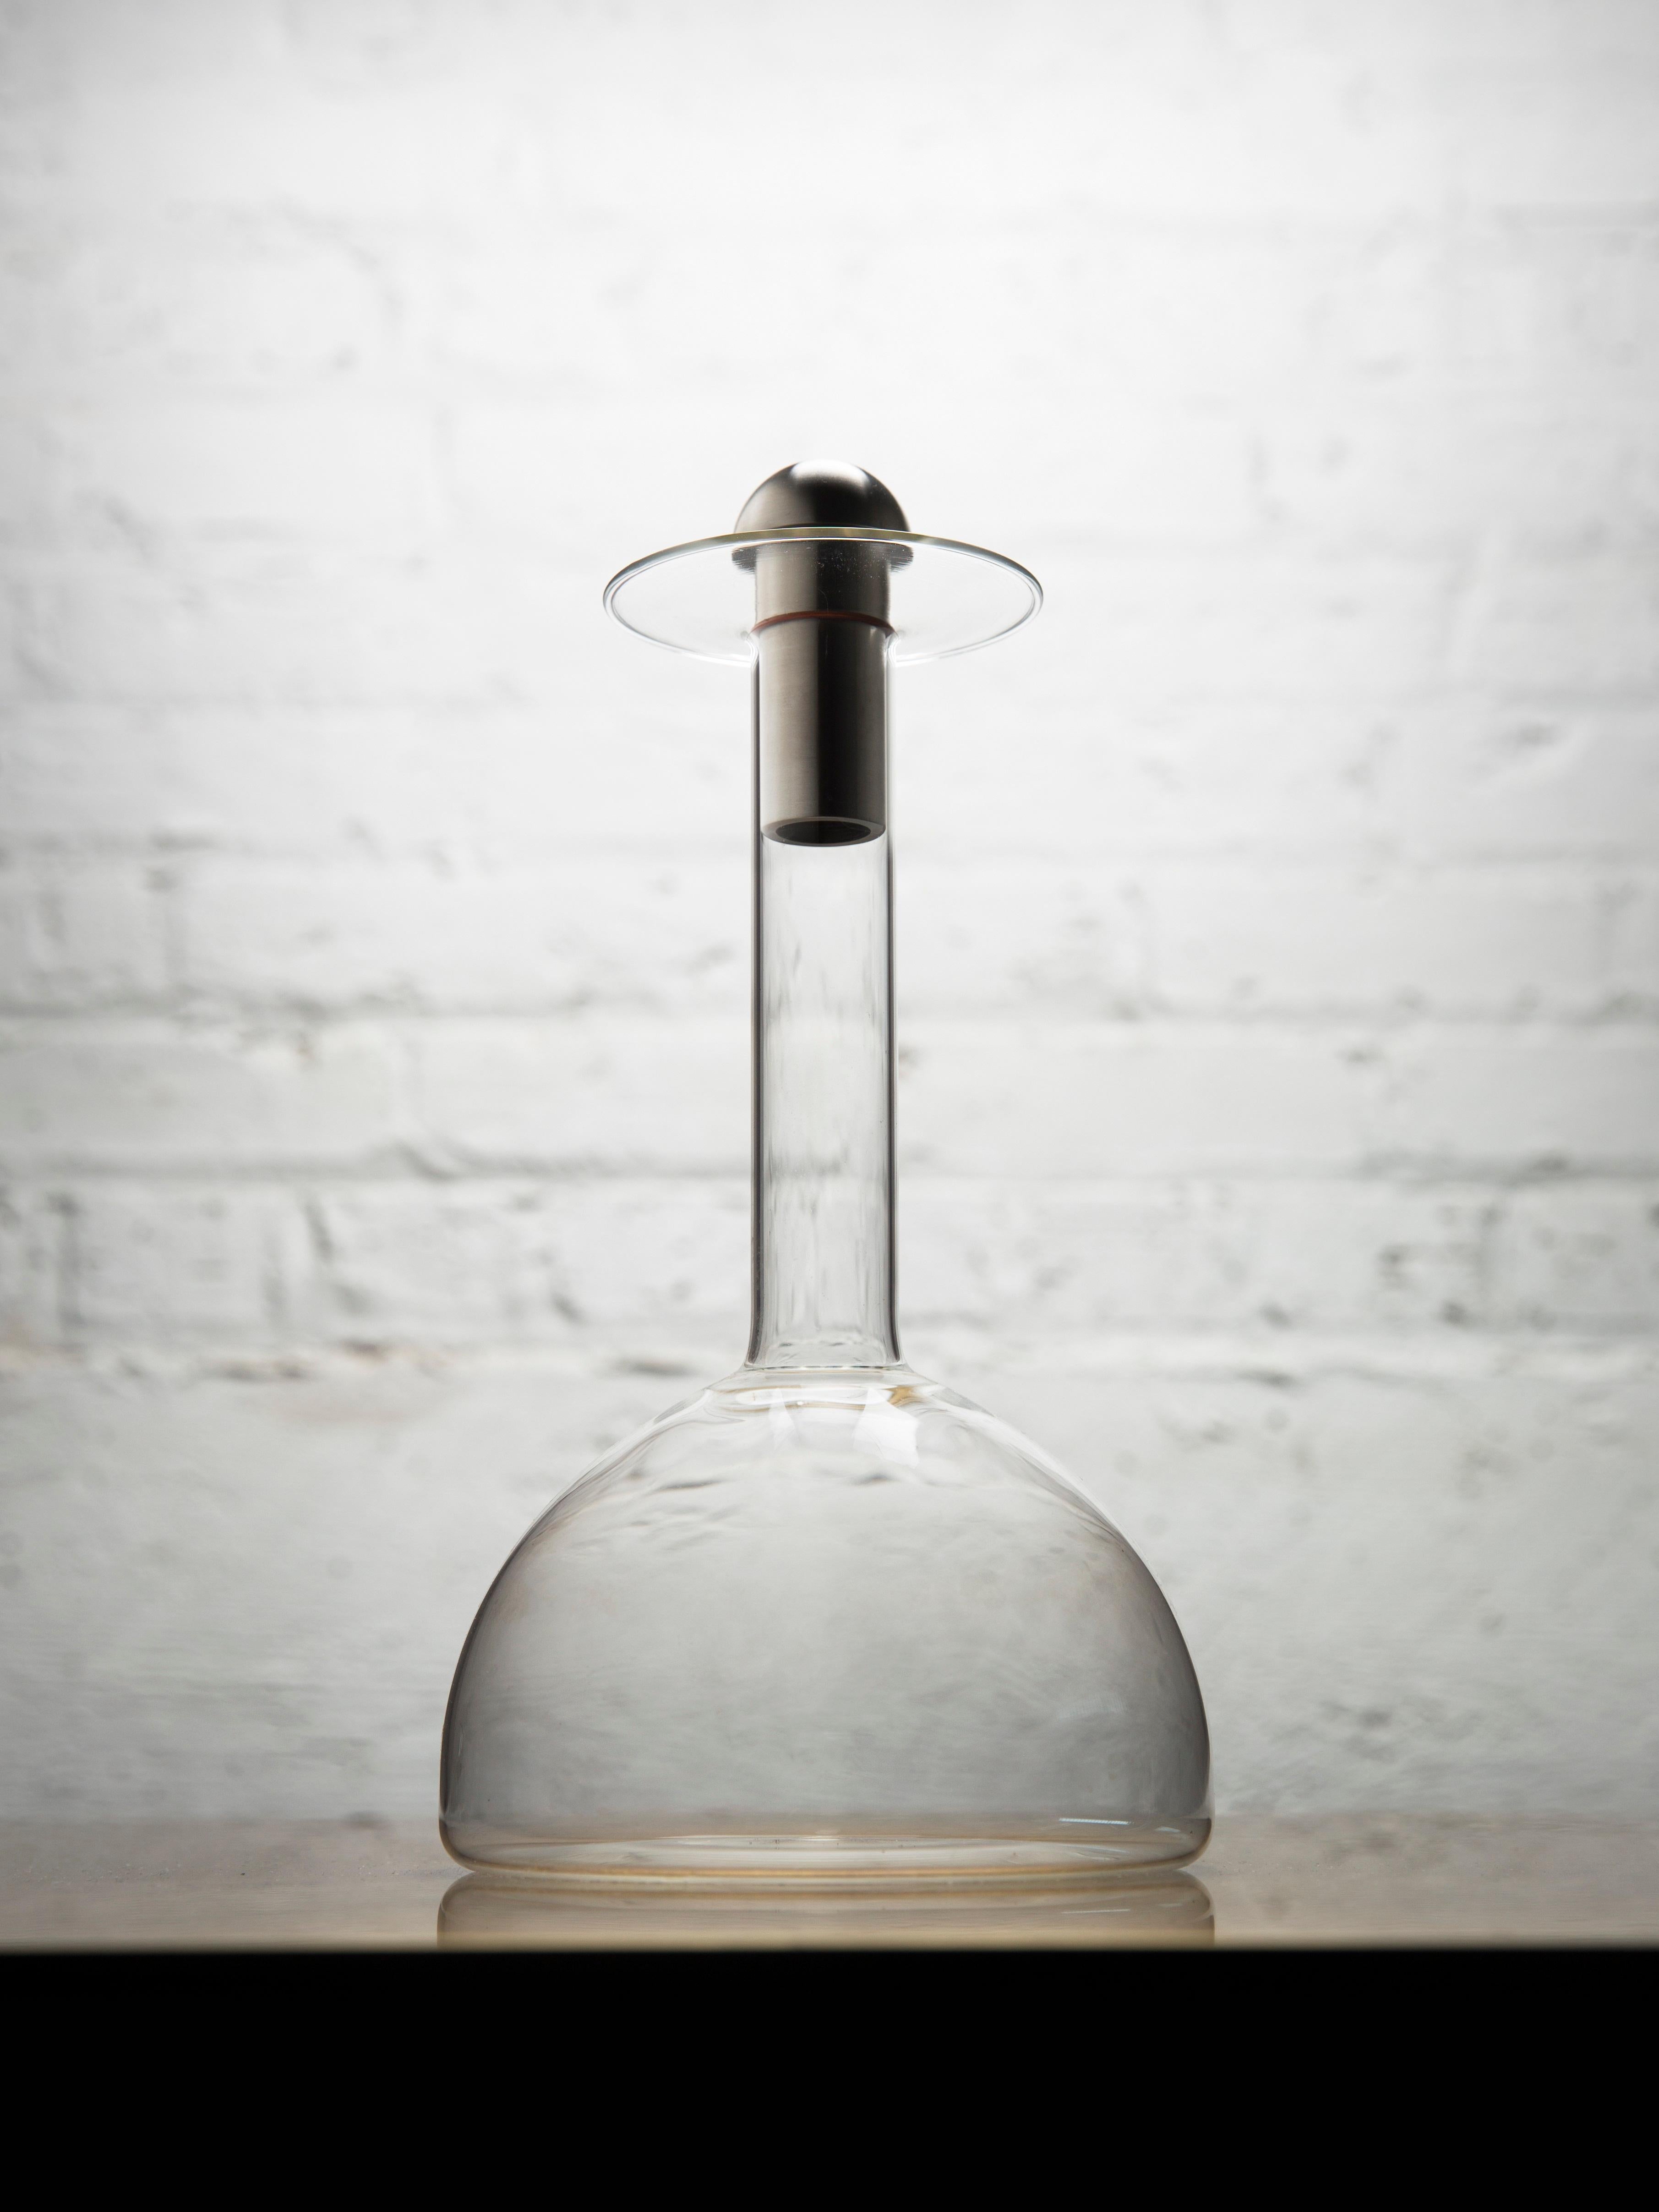 Glass decanter by Gentner Design
Dimensions: D 15.2 x H 28 cm
Materials: glass, brass

A place to ready the tastes and hidden intoxicating offerings of your libation to the evening.

Gentner Design
Rooted in a language of sculpture, character